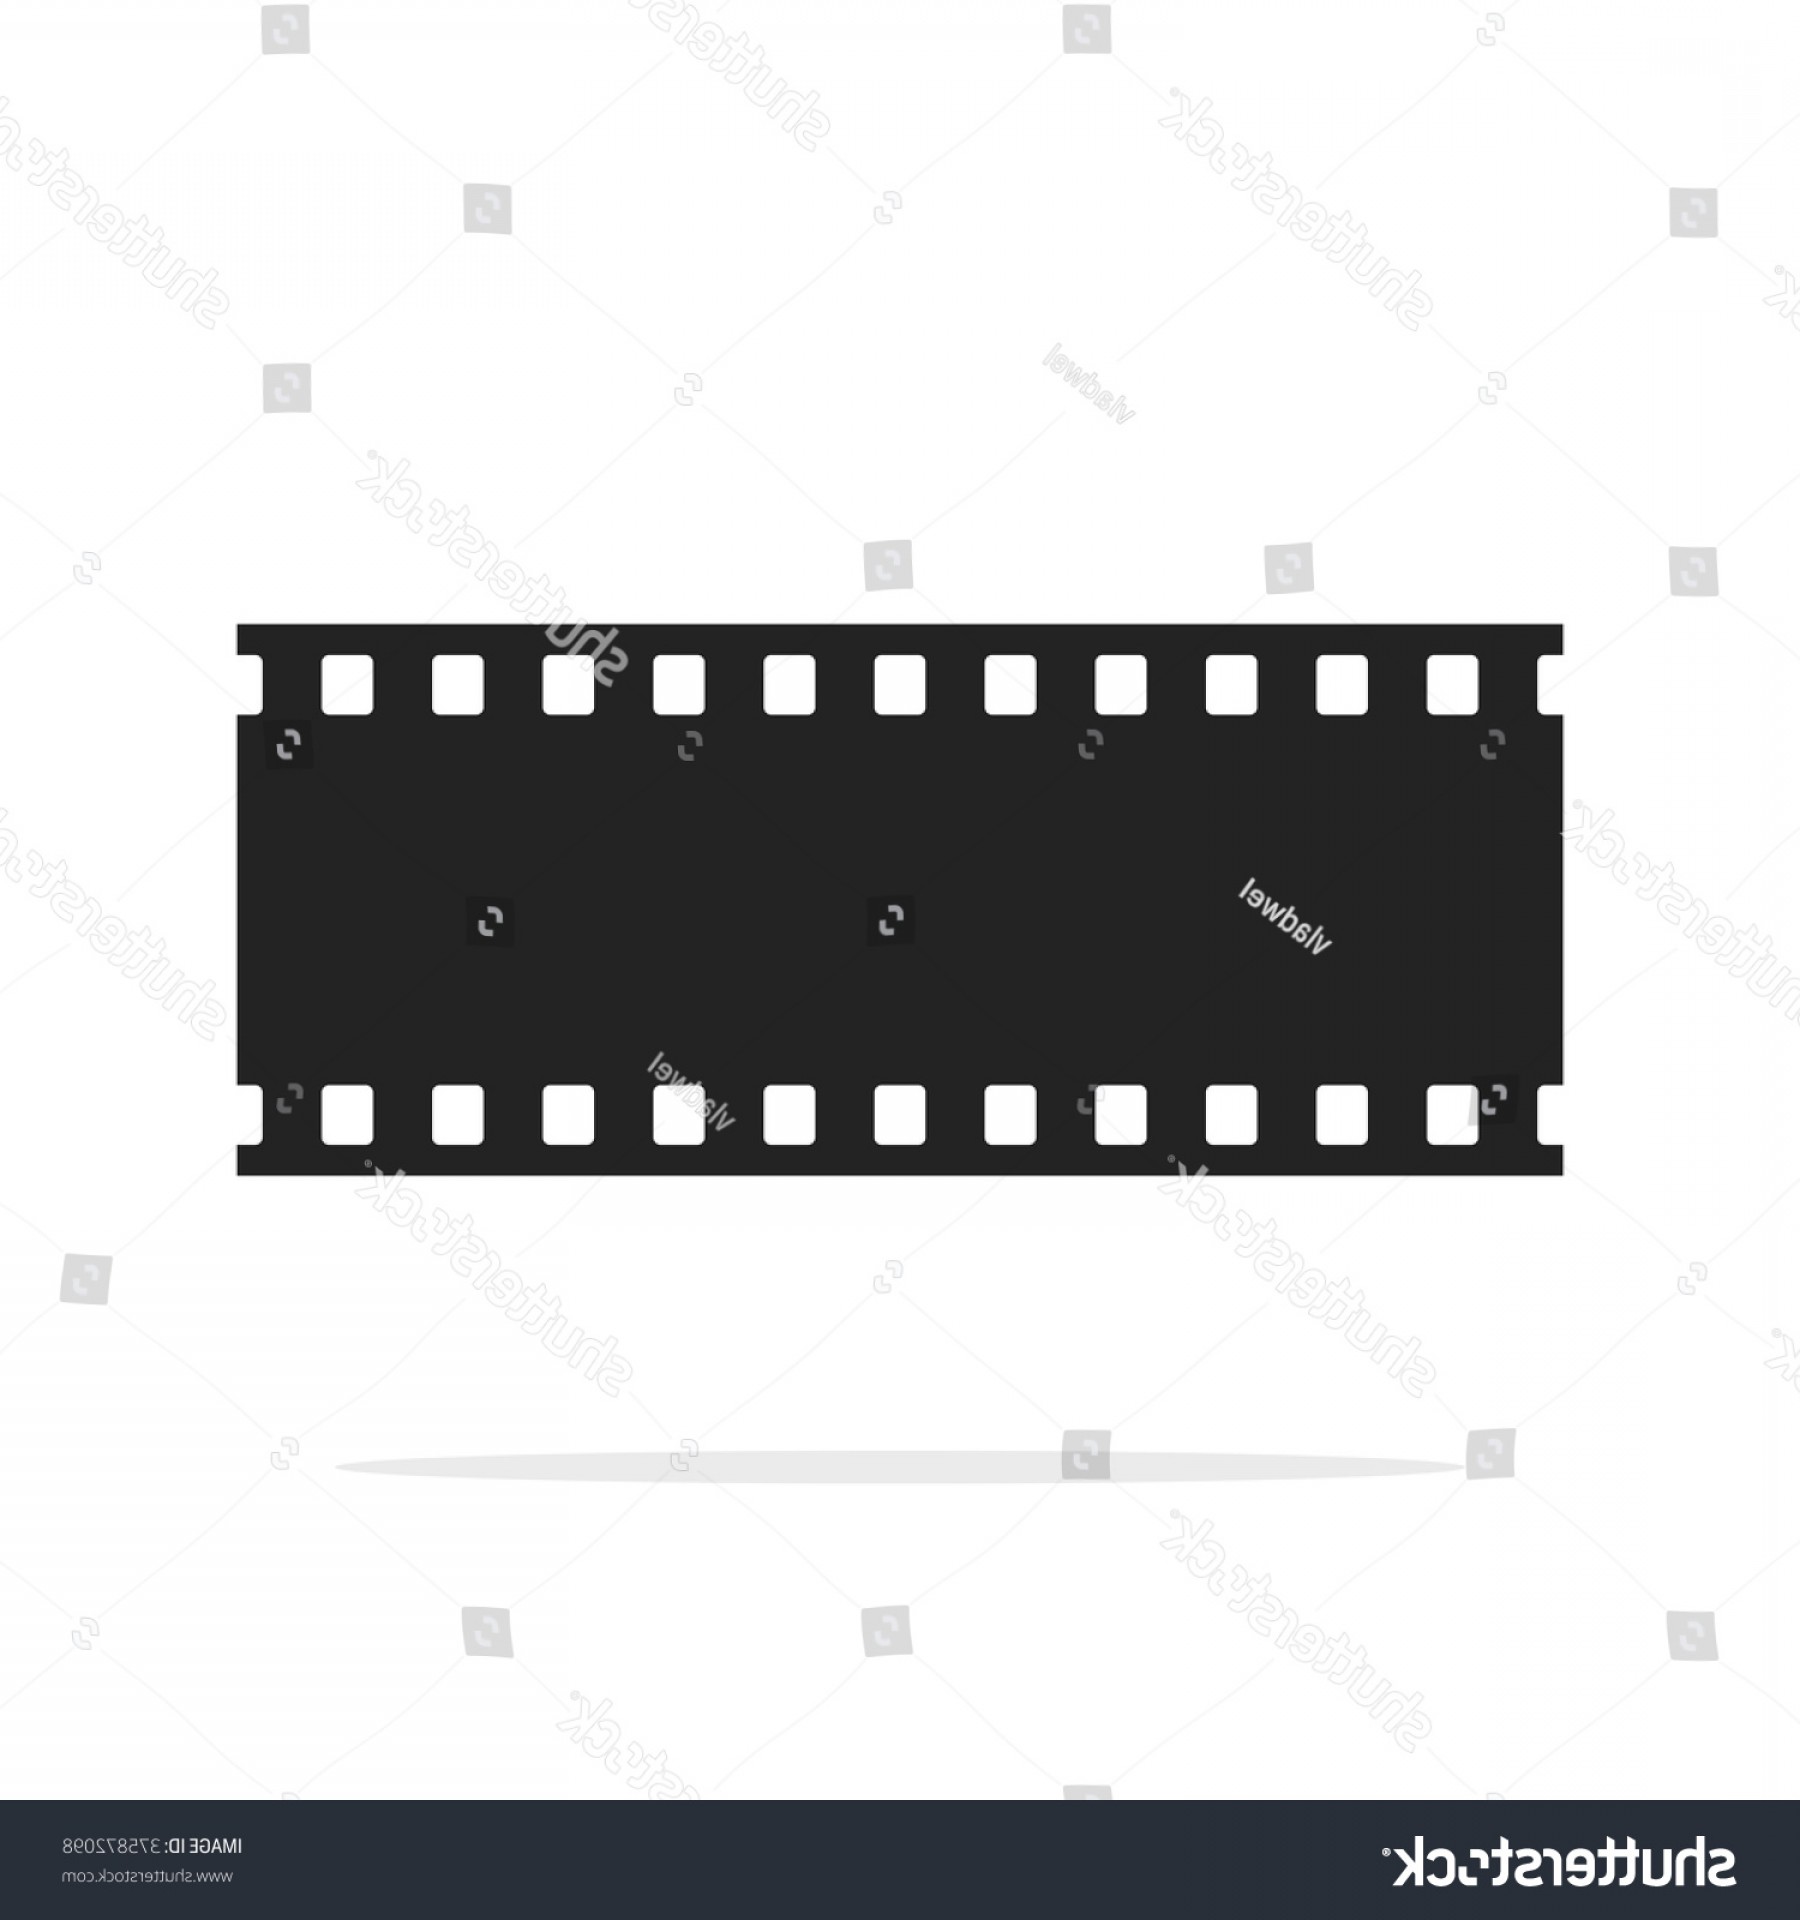 Film Strip Vector at Vectorified.com | Collection of Film Strip Vector ...